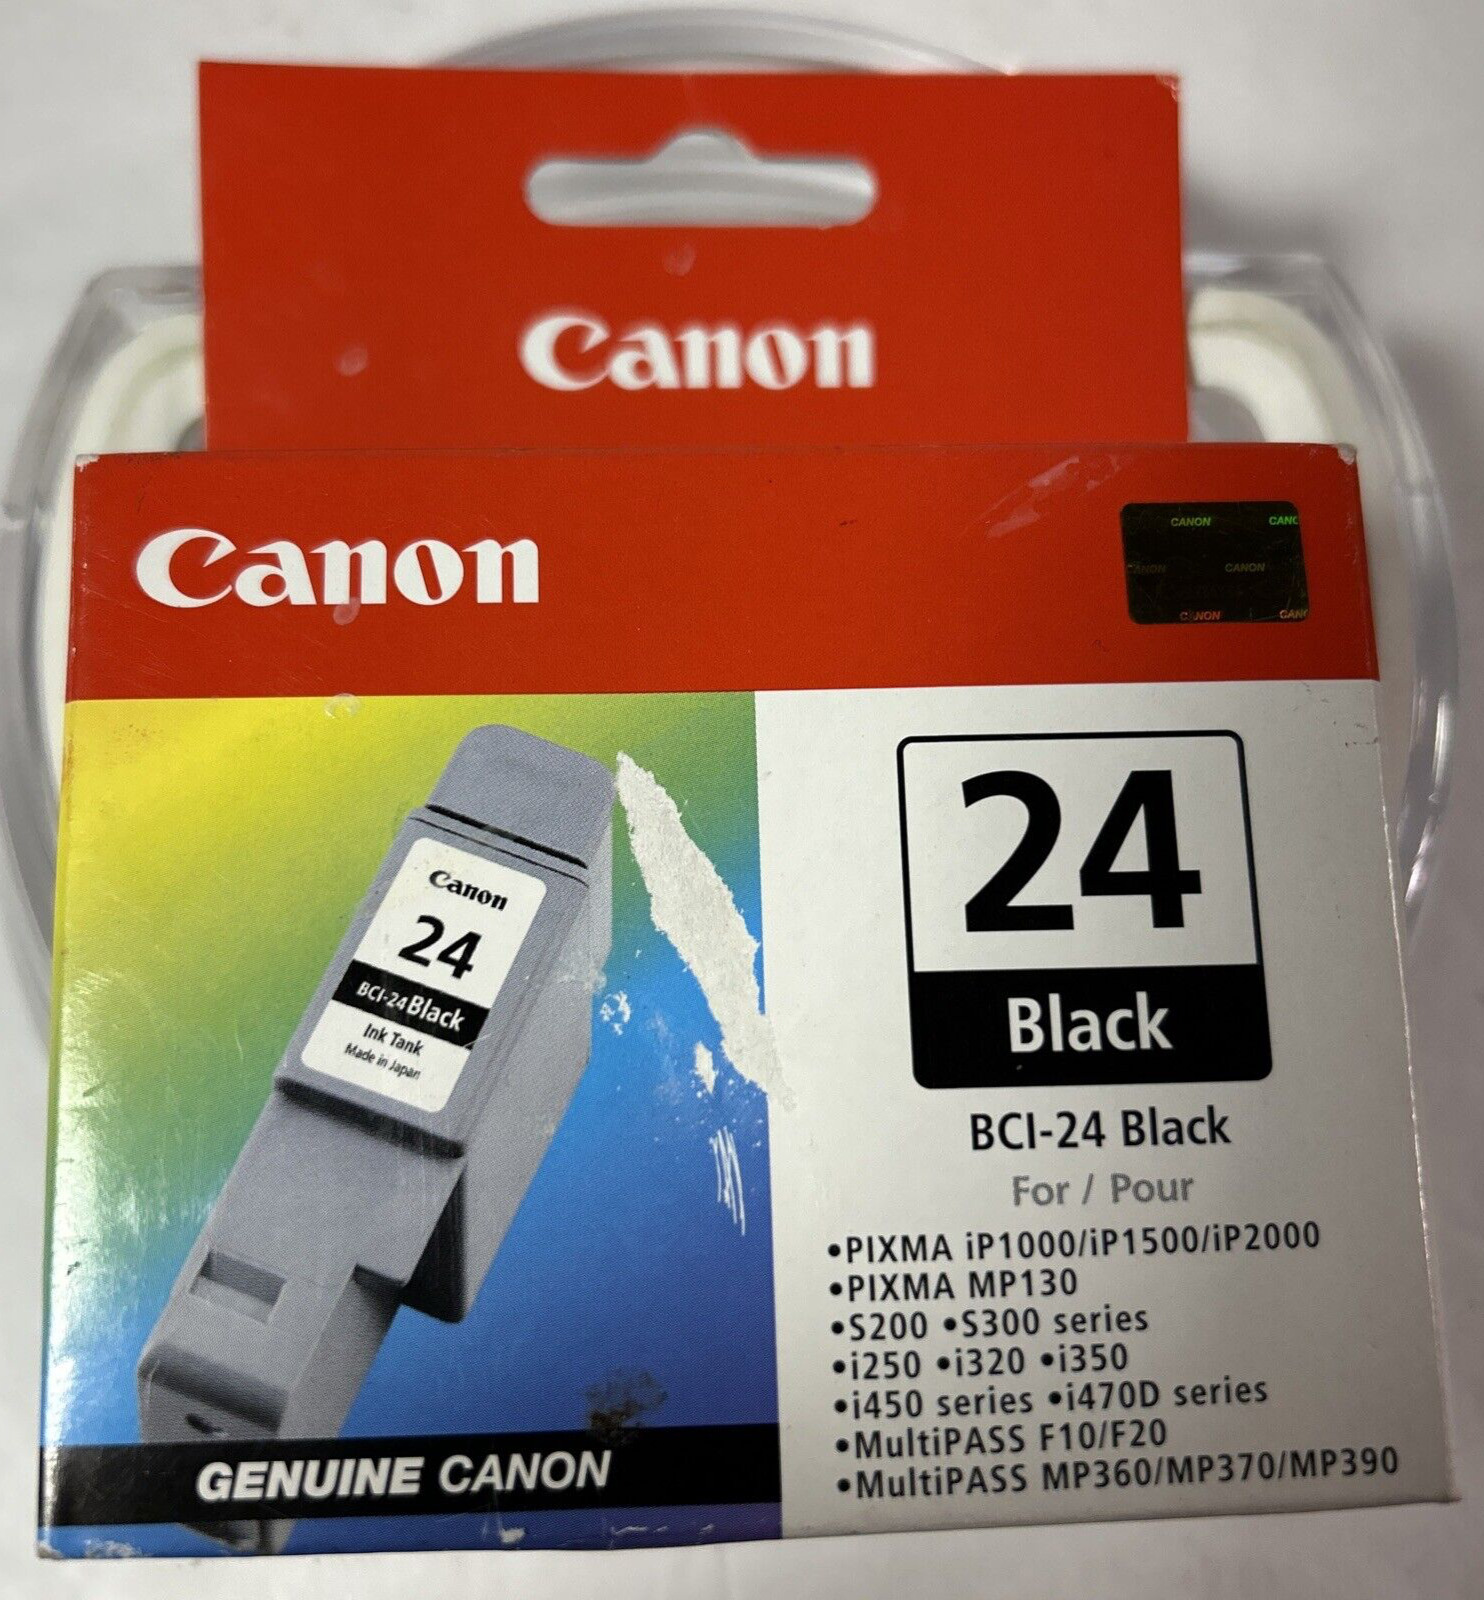 New Genuine Canon BCI-24 Black Ink tank Cartridges Sealed. Fast Ship 7 DAY SALE